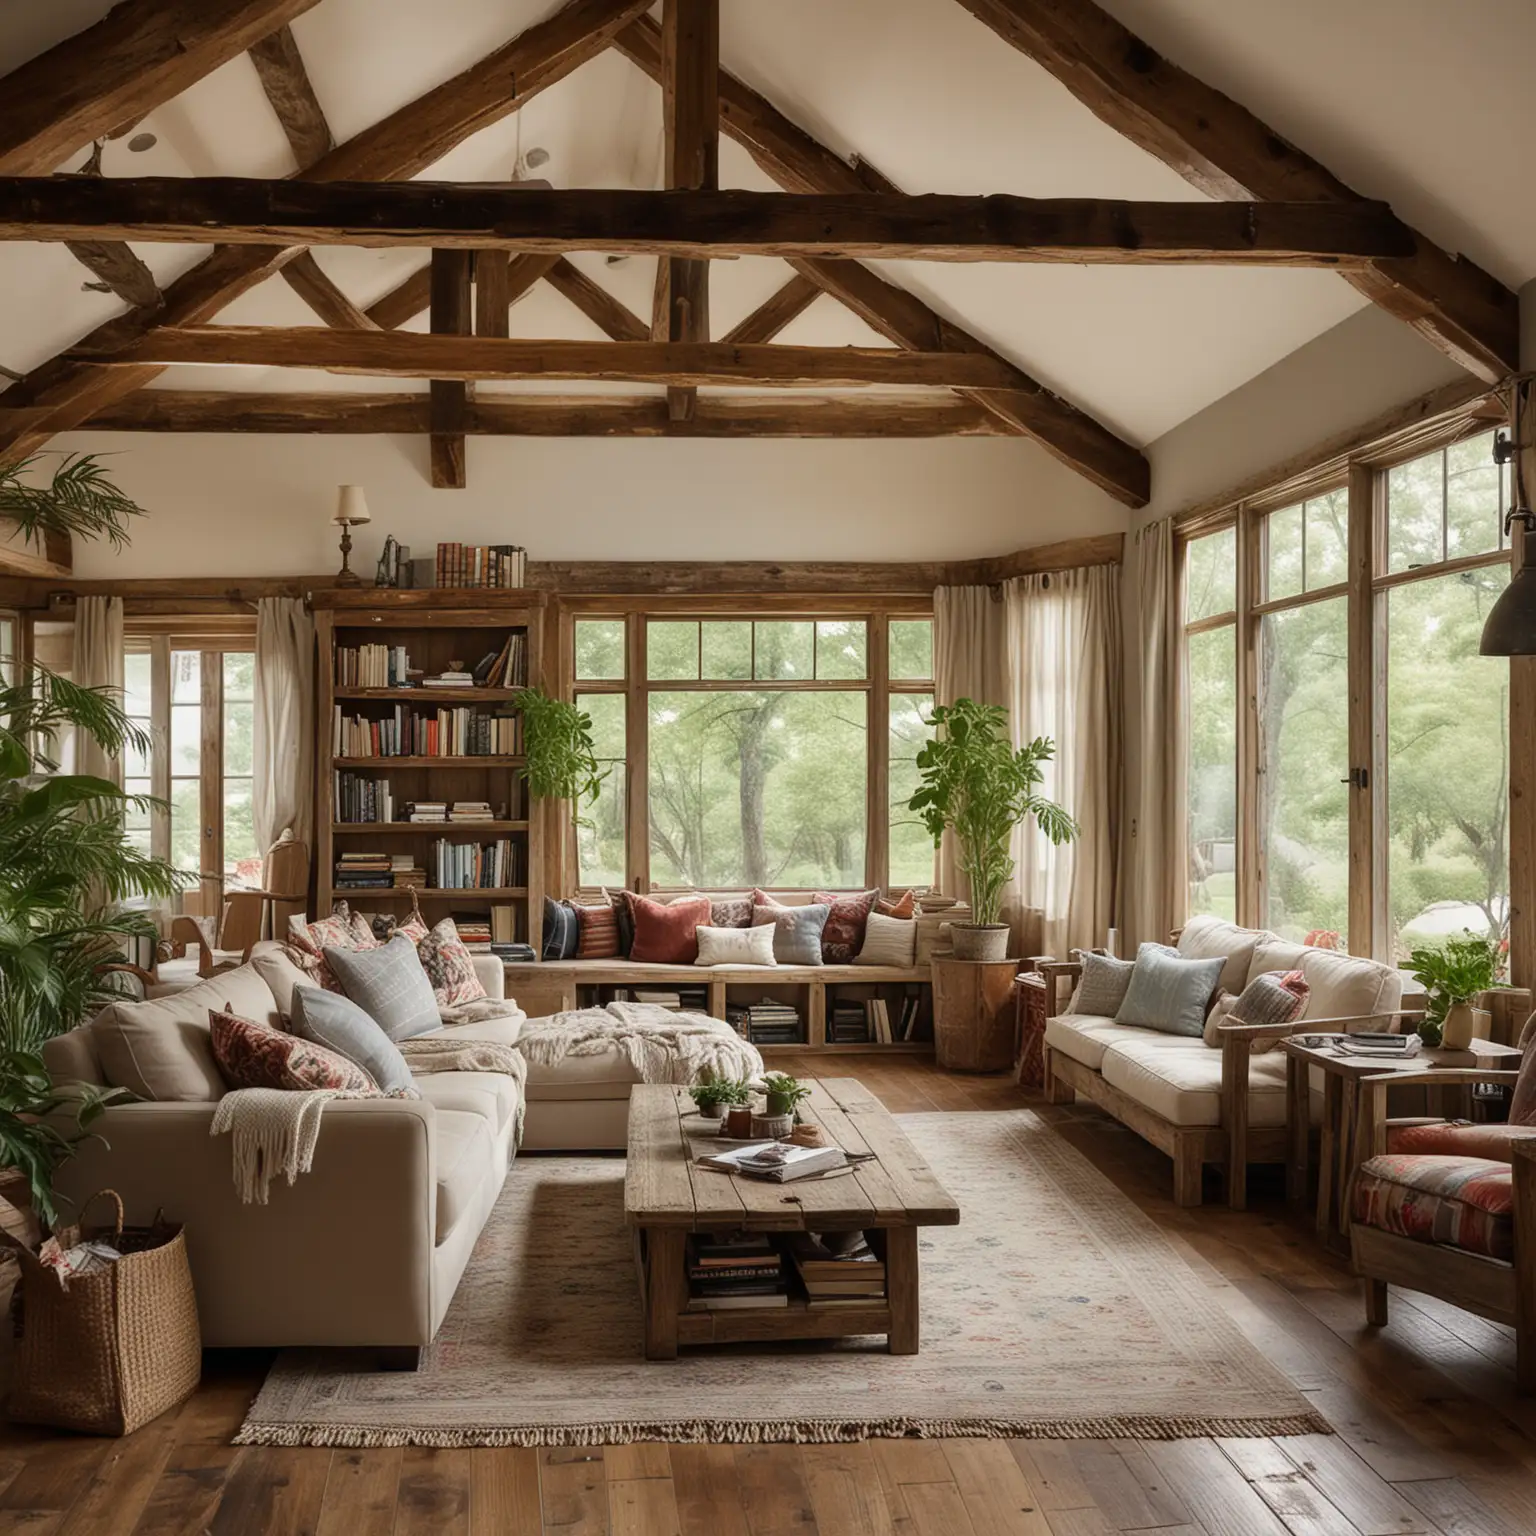 Generate a wide shot of a rustic open-concept living space with exposed wooden beams and wide plank wooden floors. Incorporate a comfortable seating area with a fabric sofa, a distressed wood coffee table, and a mix of patterned cushions. Add a large, reclaimed wood bookshelf filled with books, decorative items, and indoor plants. Ensure natural light floods the room through large windows, complemented by warm, ambient lighting.